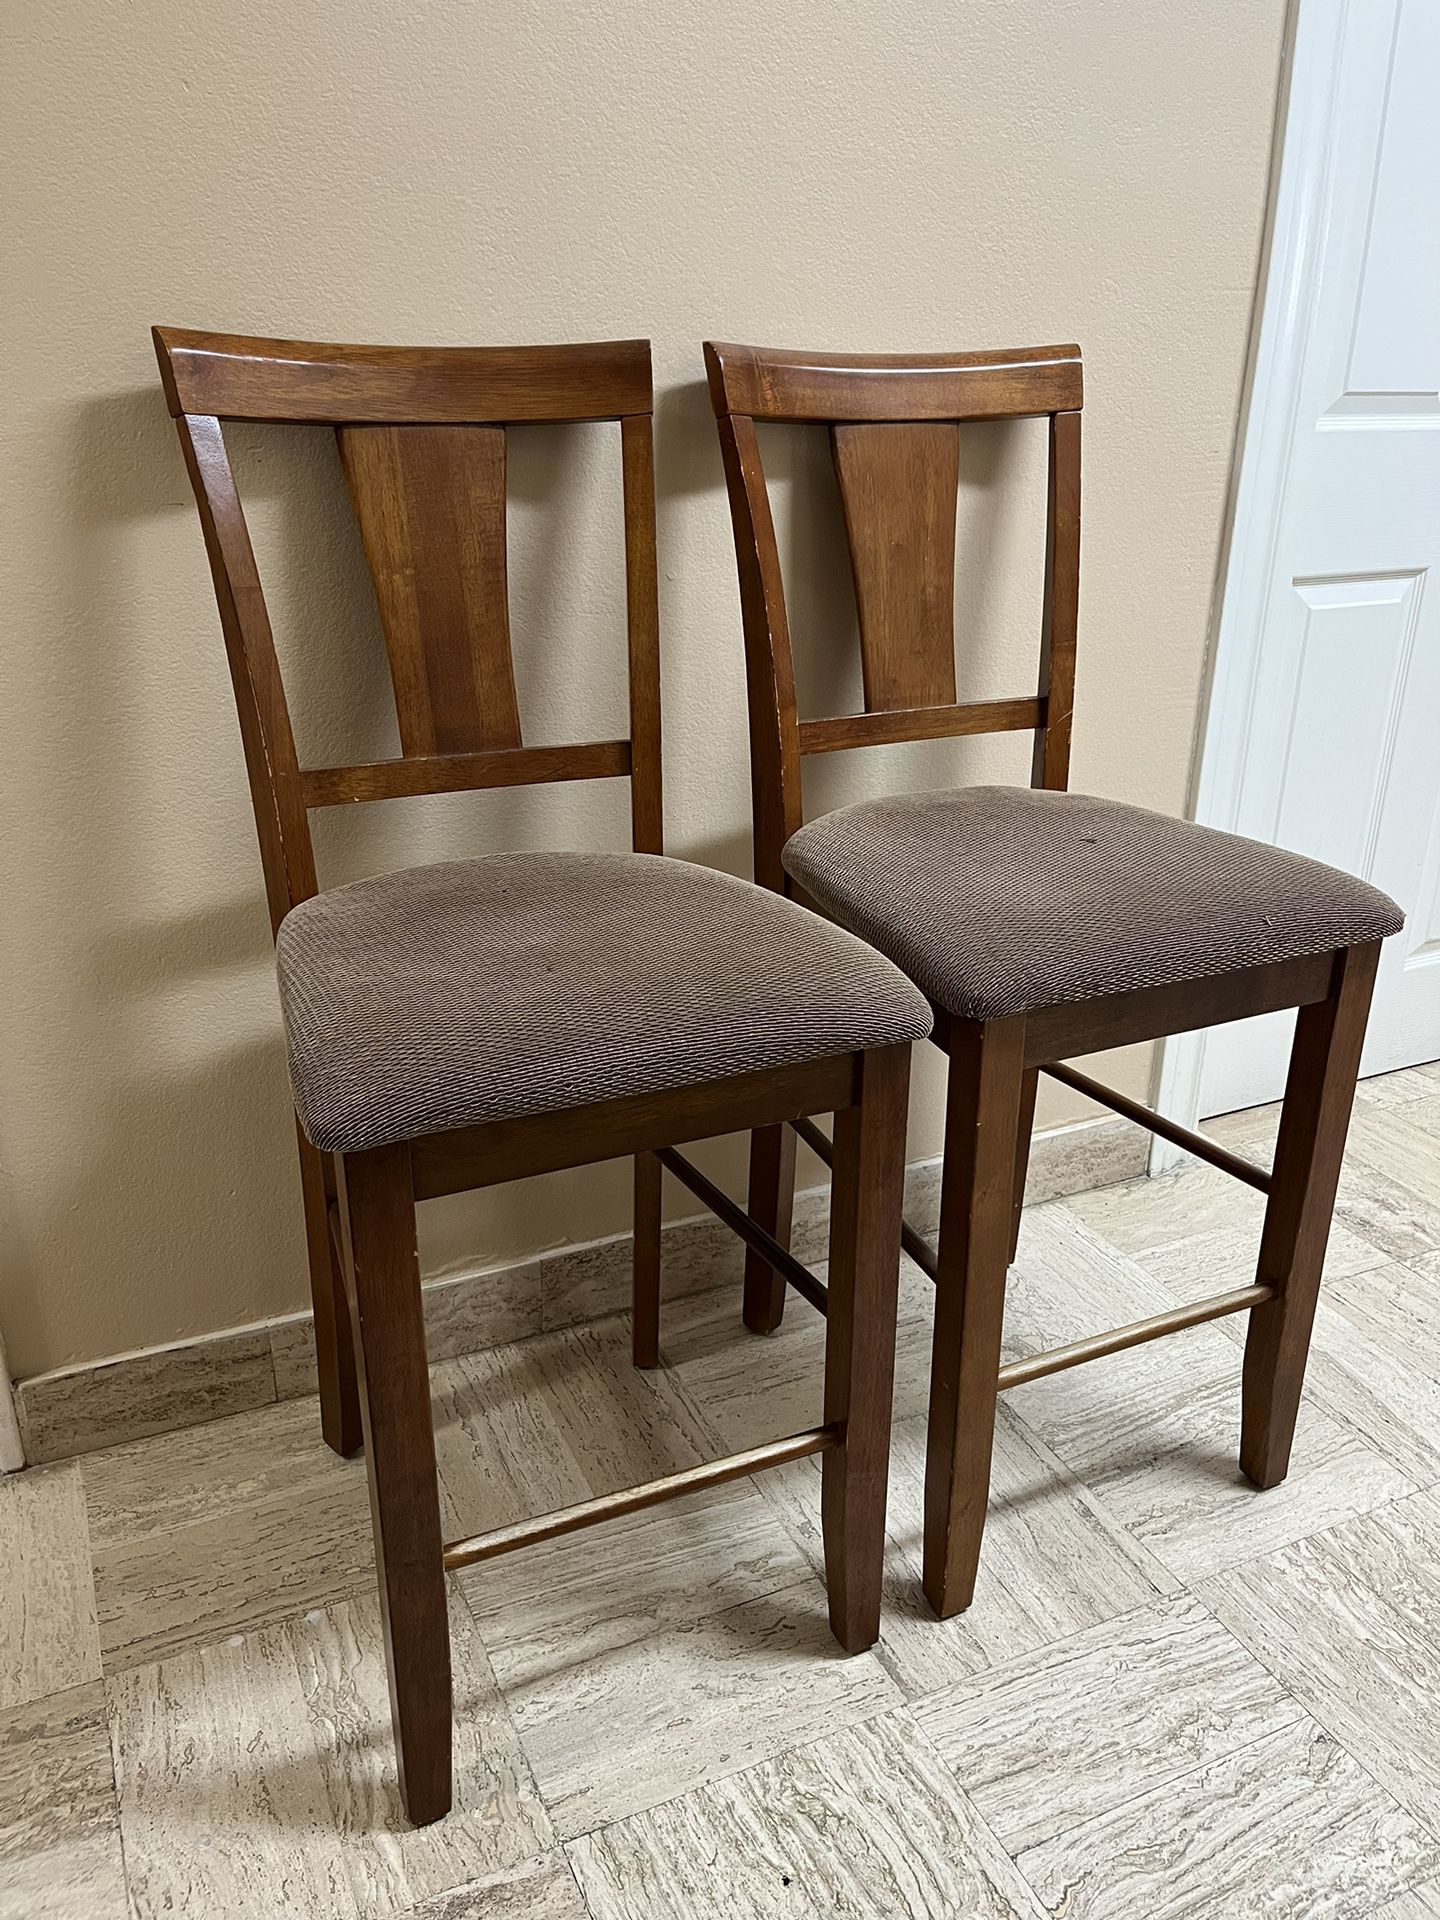 Selling Dining Chairs